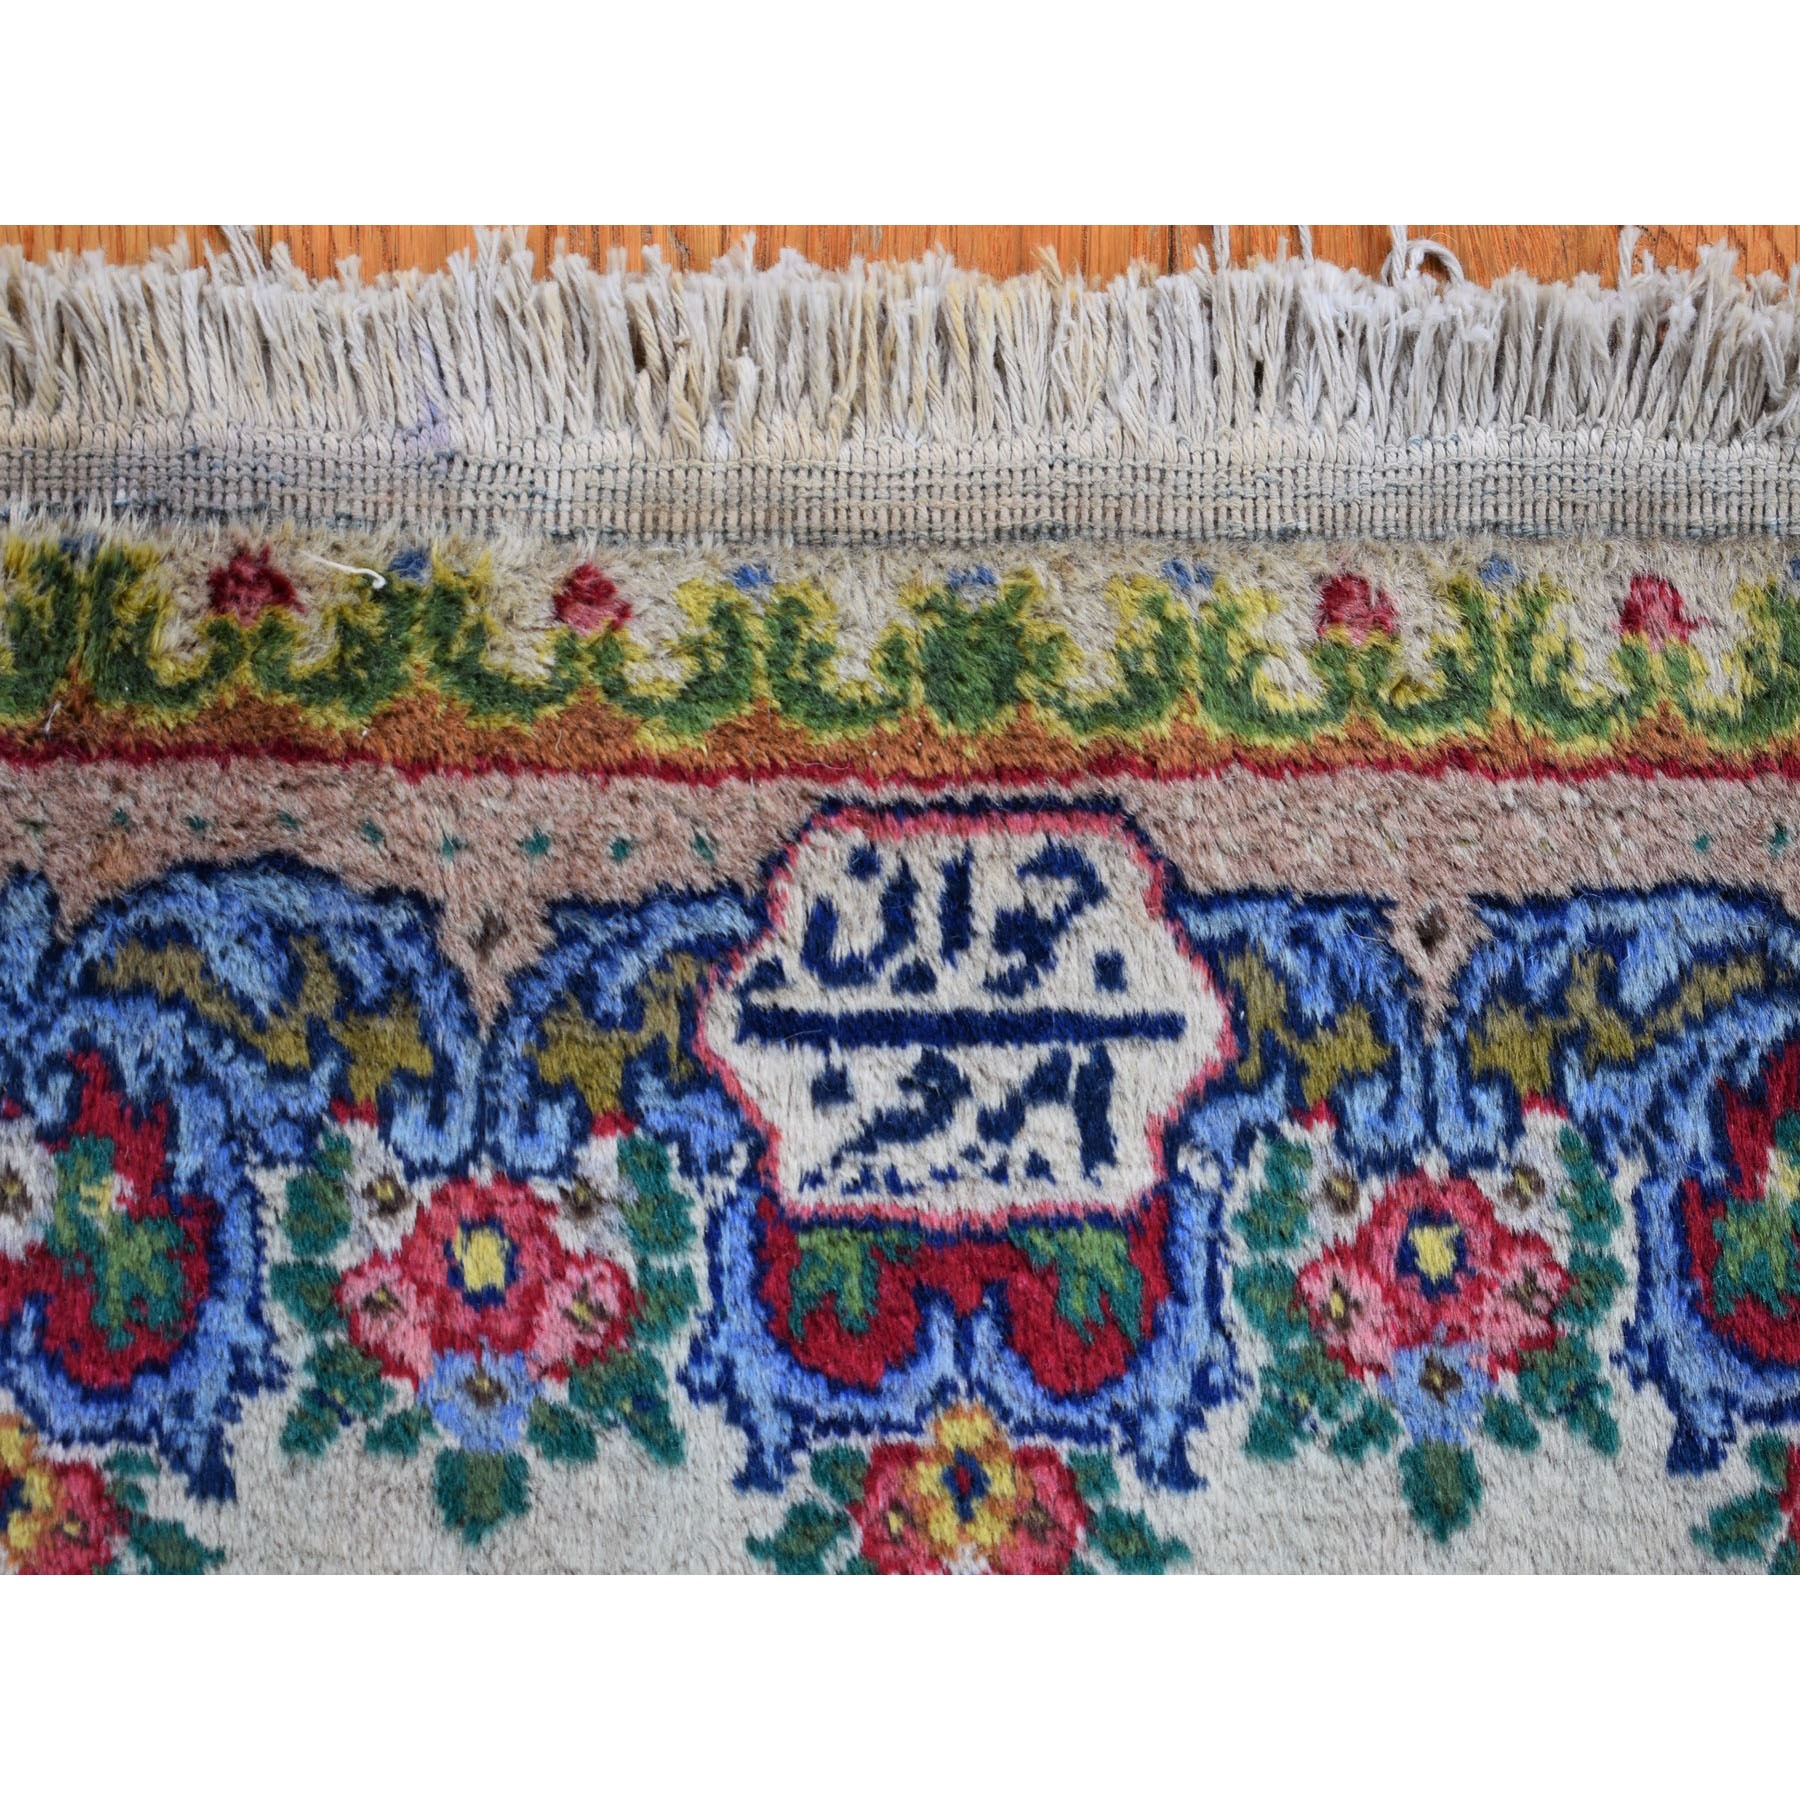 2-10 x5- Ivory Old Persian Tabriz Circa 1940, Signed Good Condition Hand Knotted Oriental Rug 